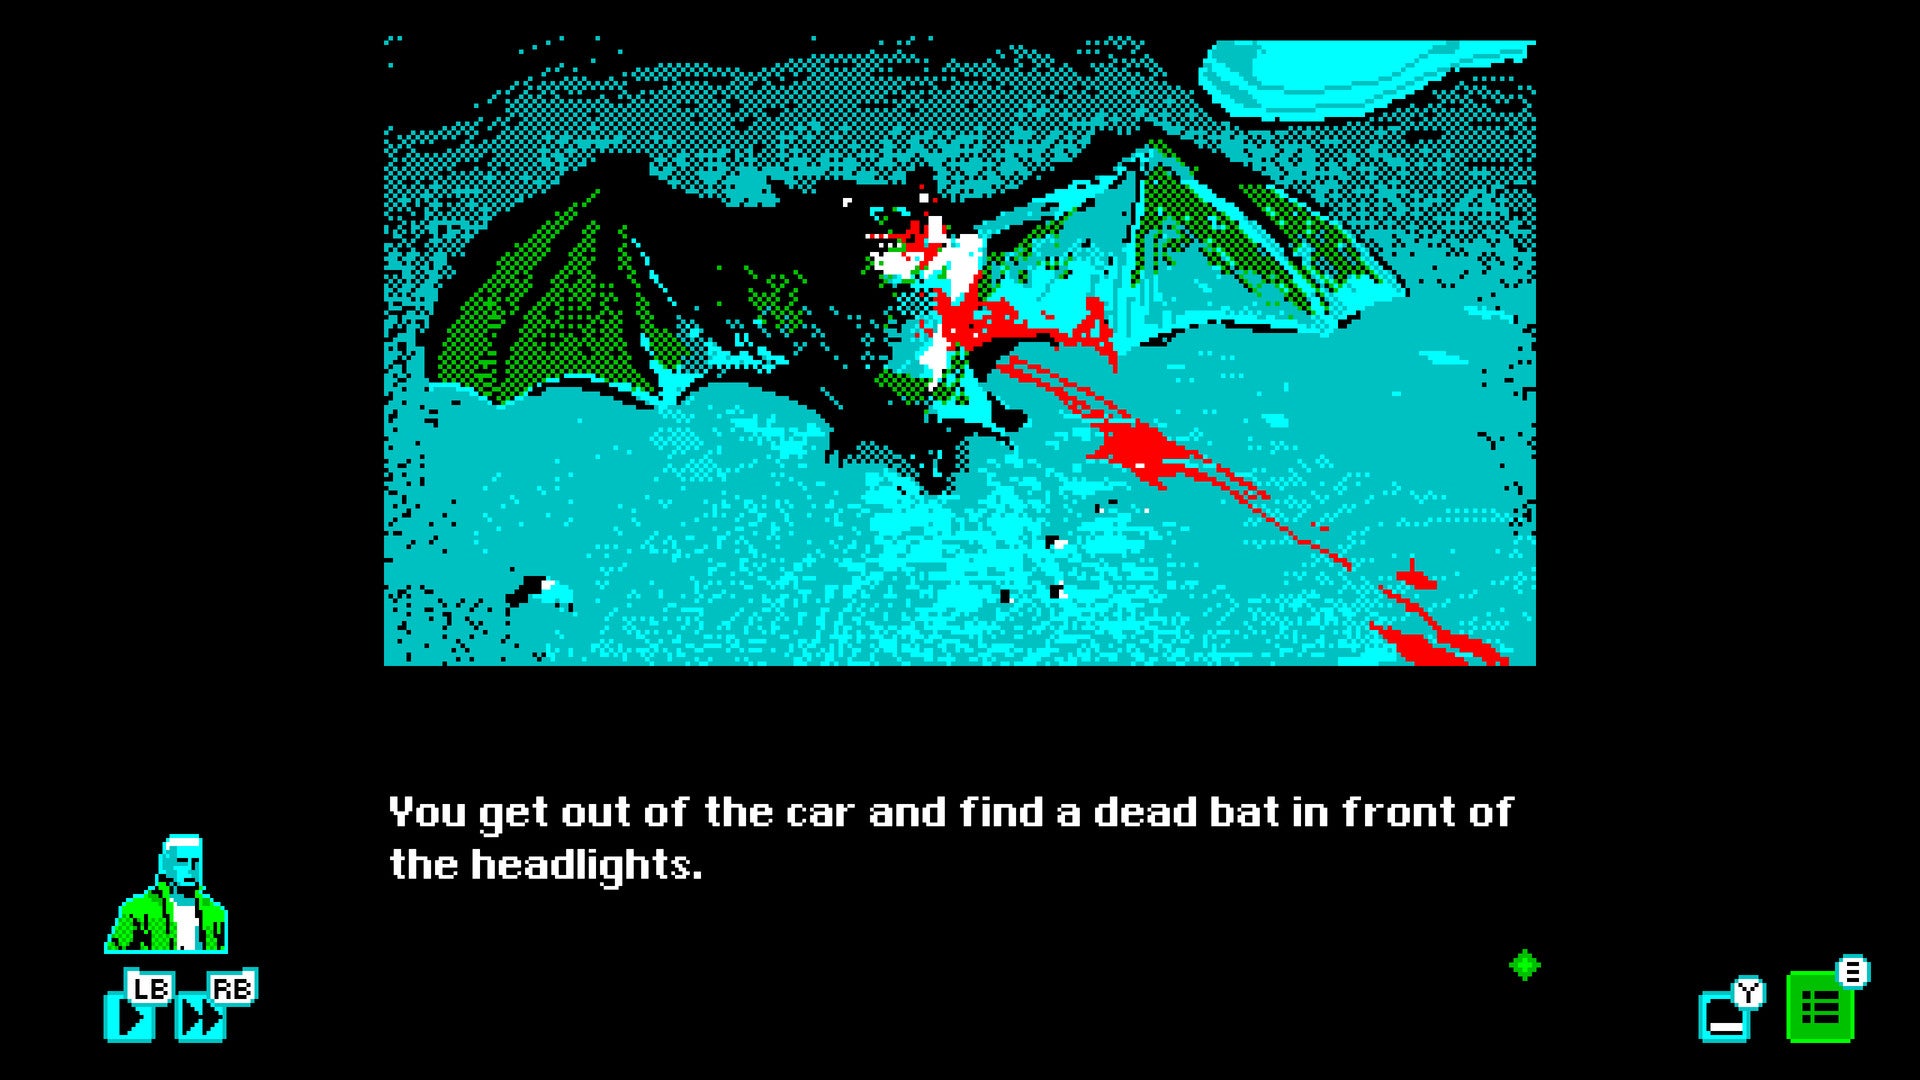 2022 best games Mothmen 1966 - in CGA style, a bat in turqoise hue with a splat of red blood is displayed, with descriptive text underneath explaining that you get out of your car to find it